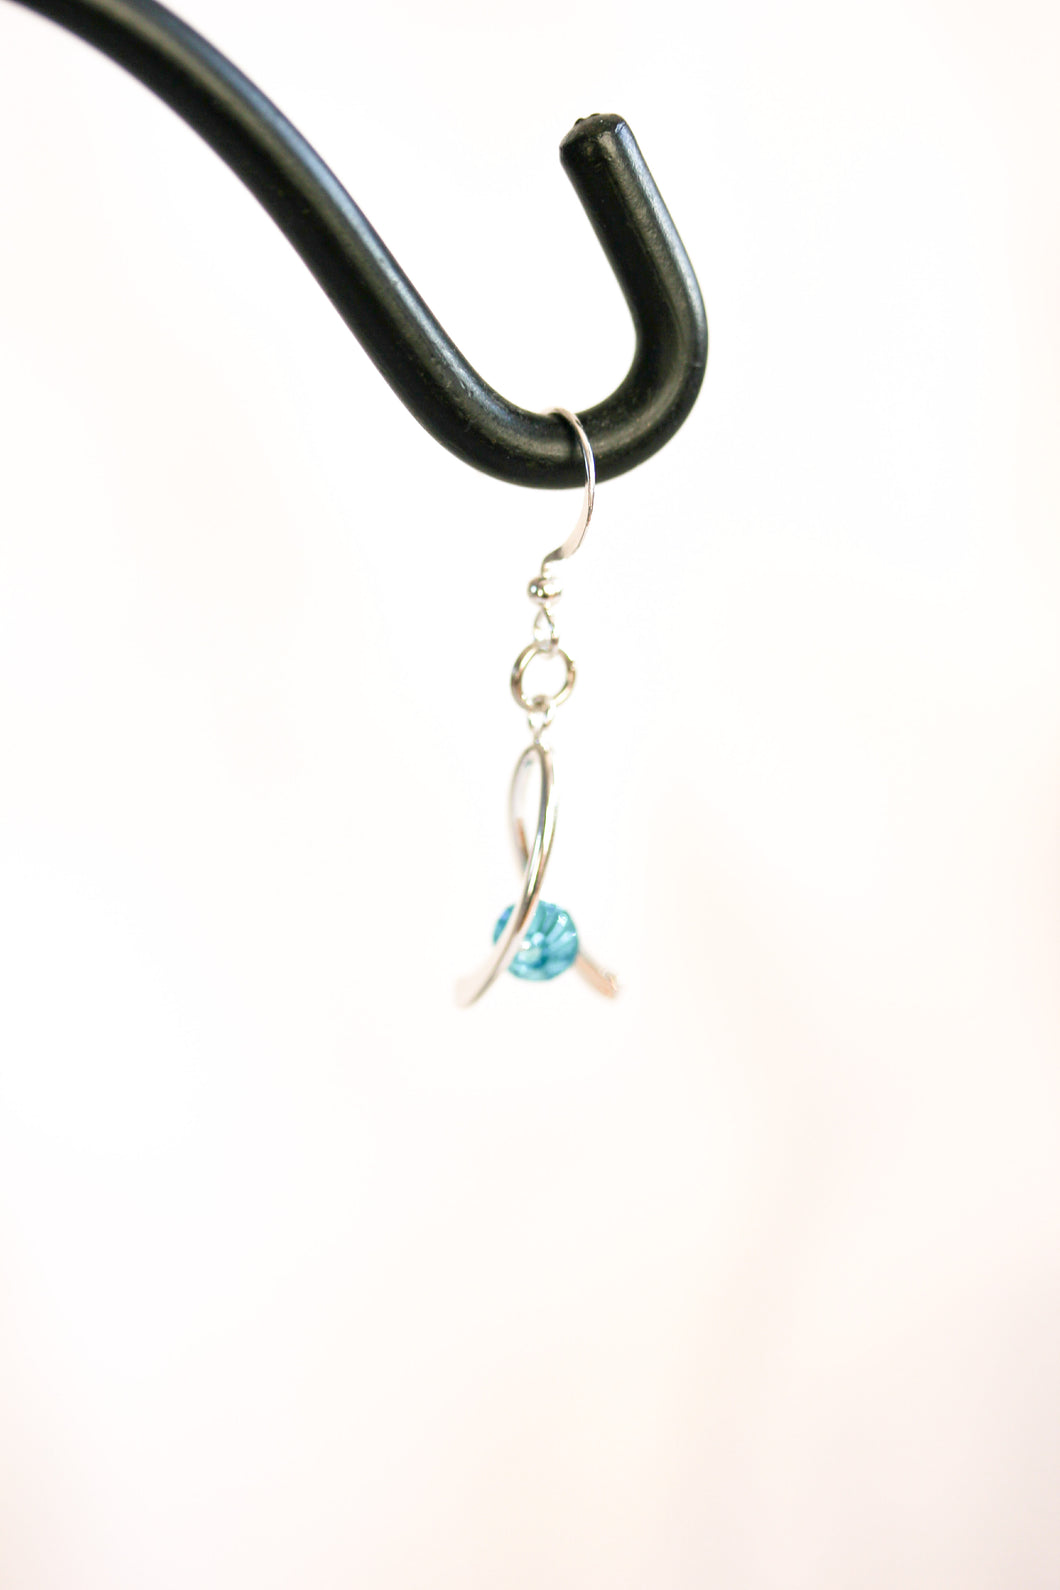 Mini ribbon twist earrings - silver with turquoise blue crystals